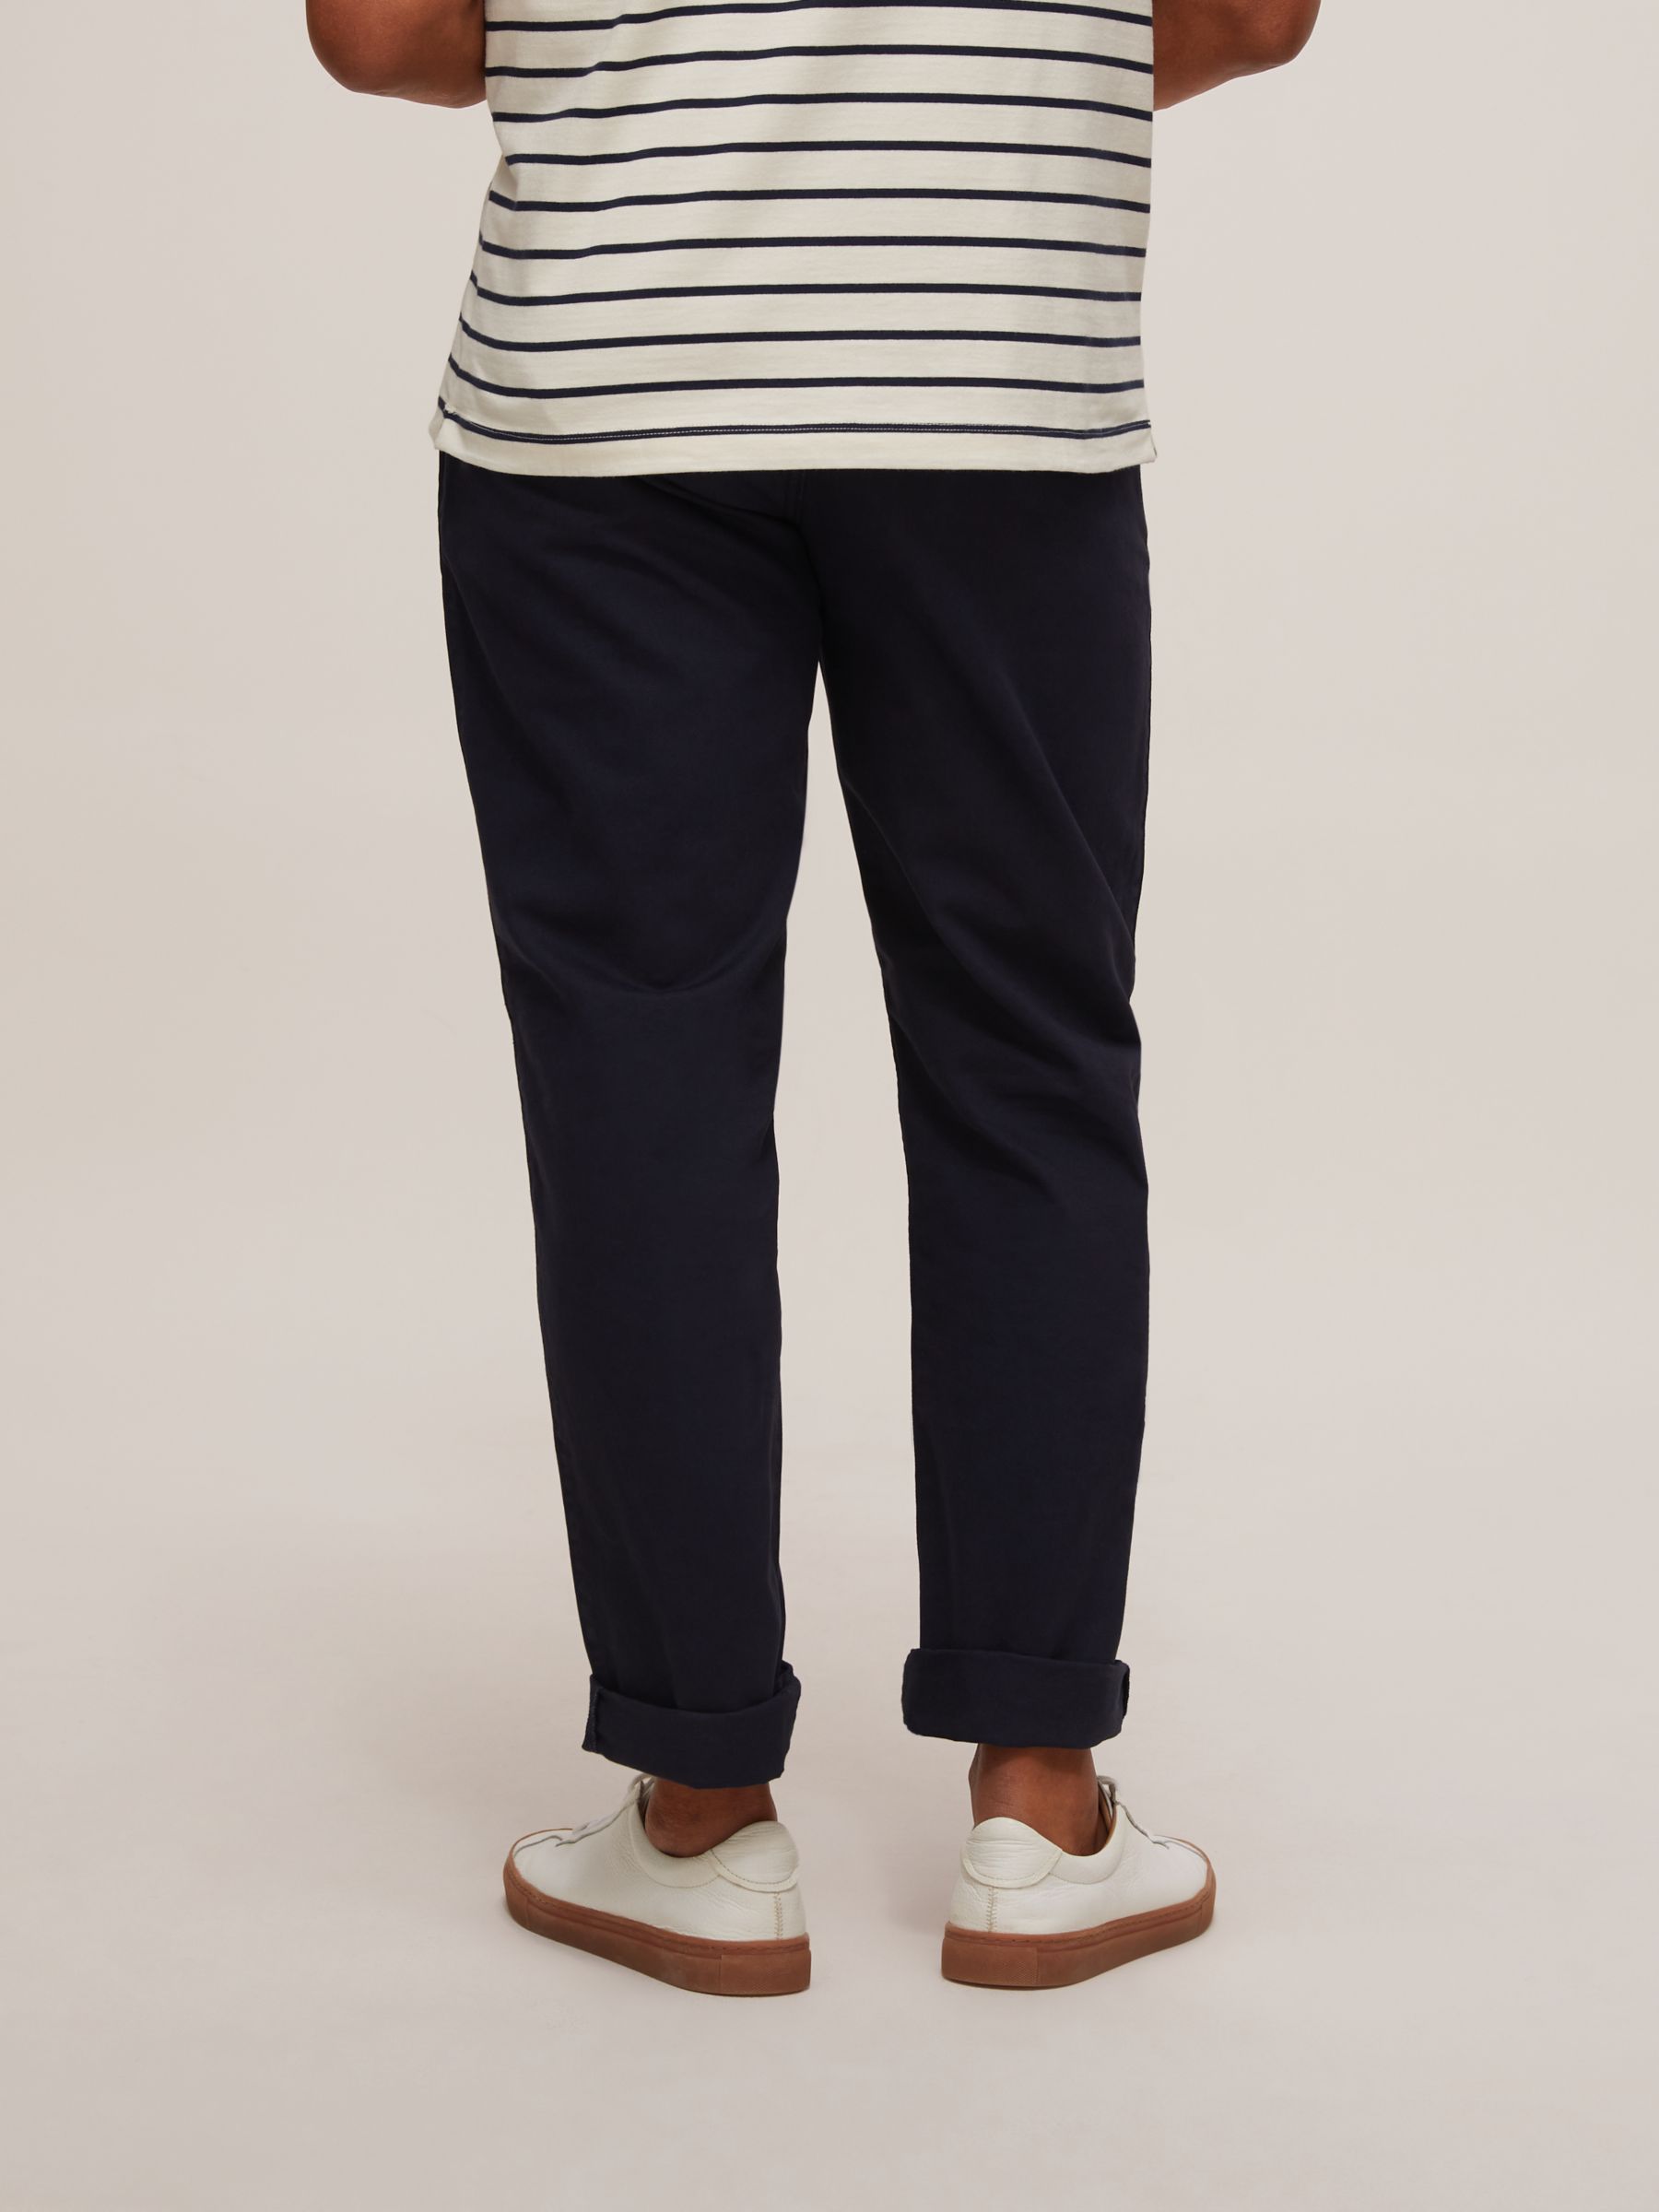 Buy John Lewis Relaxed Fit Cotton Chinos Online at johnlewis.com